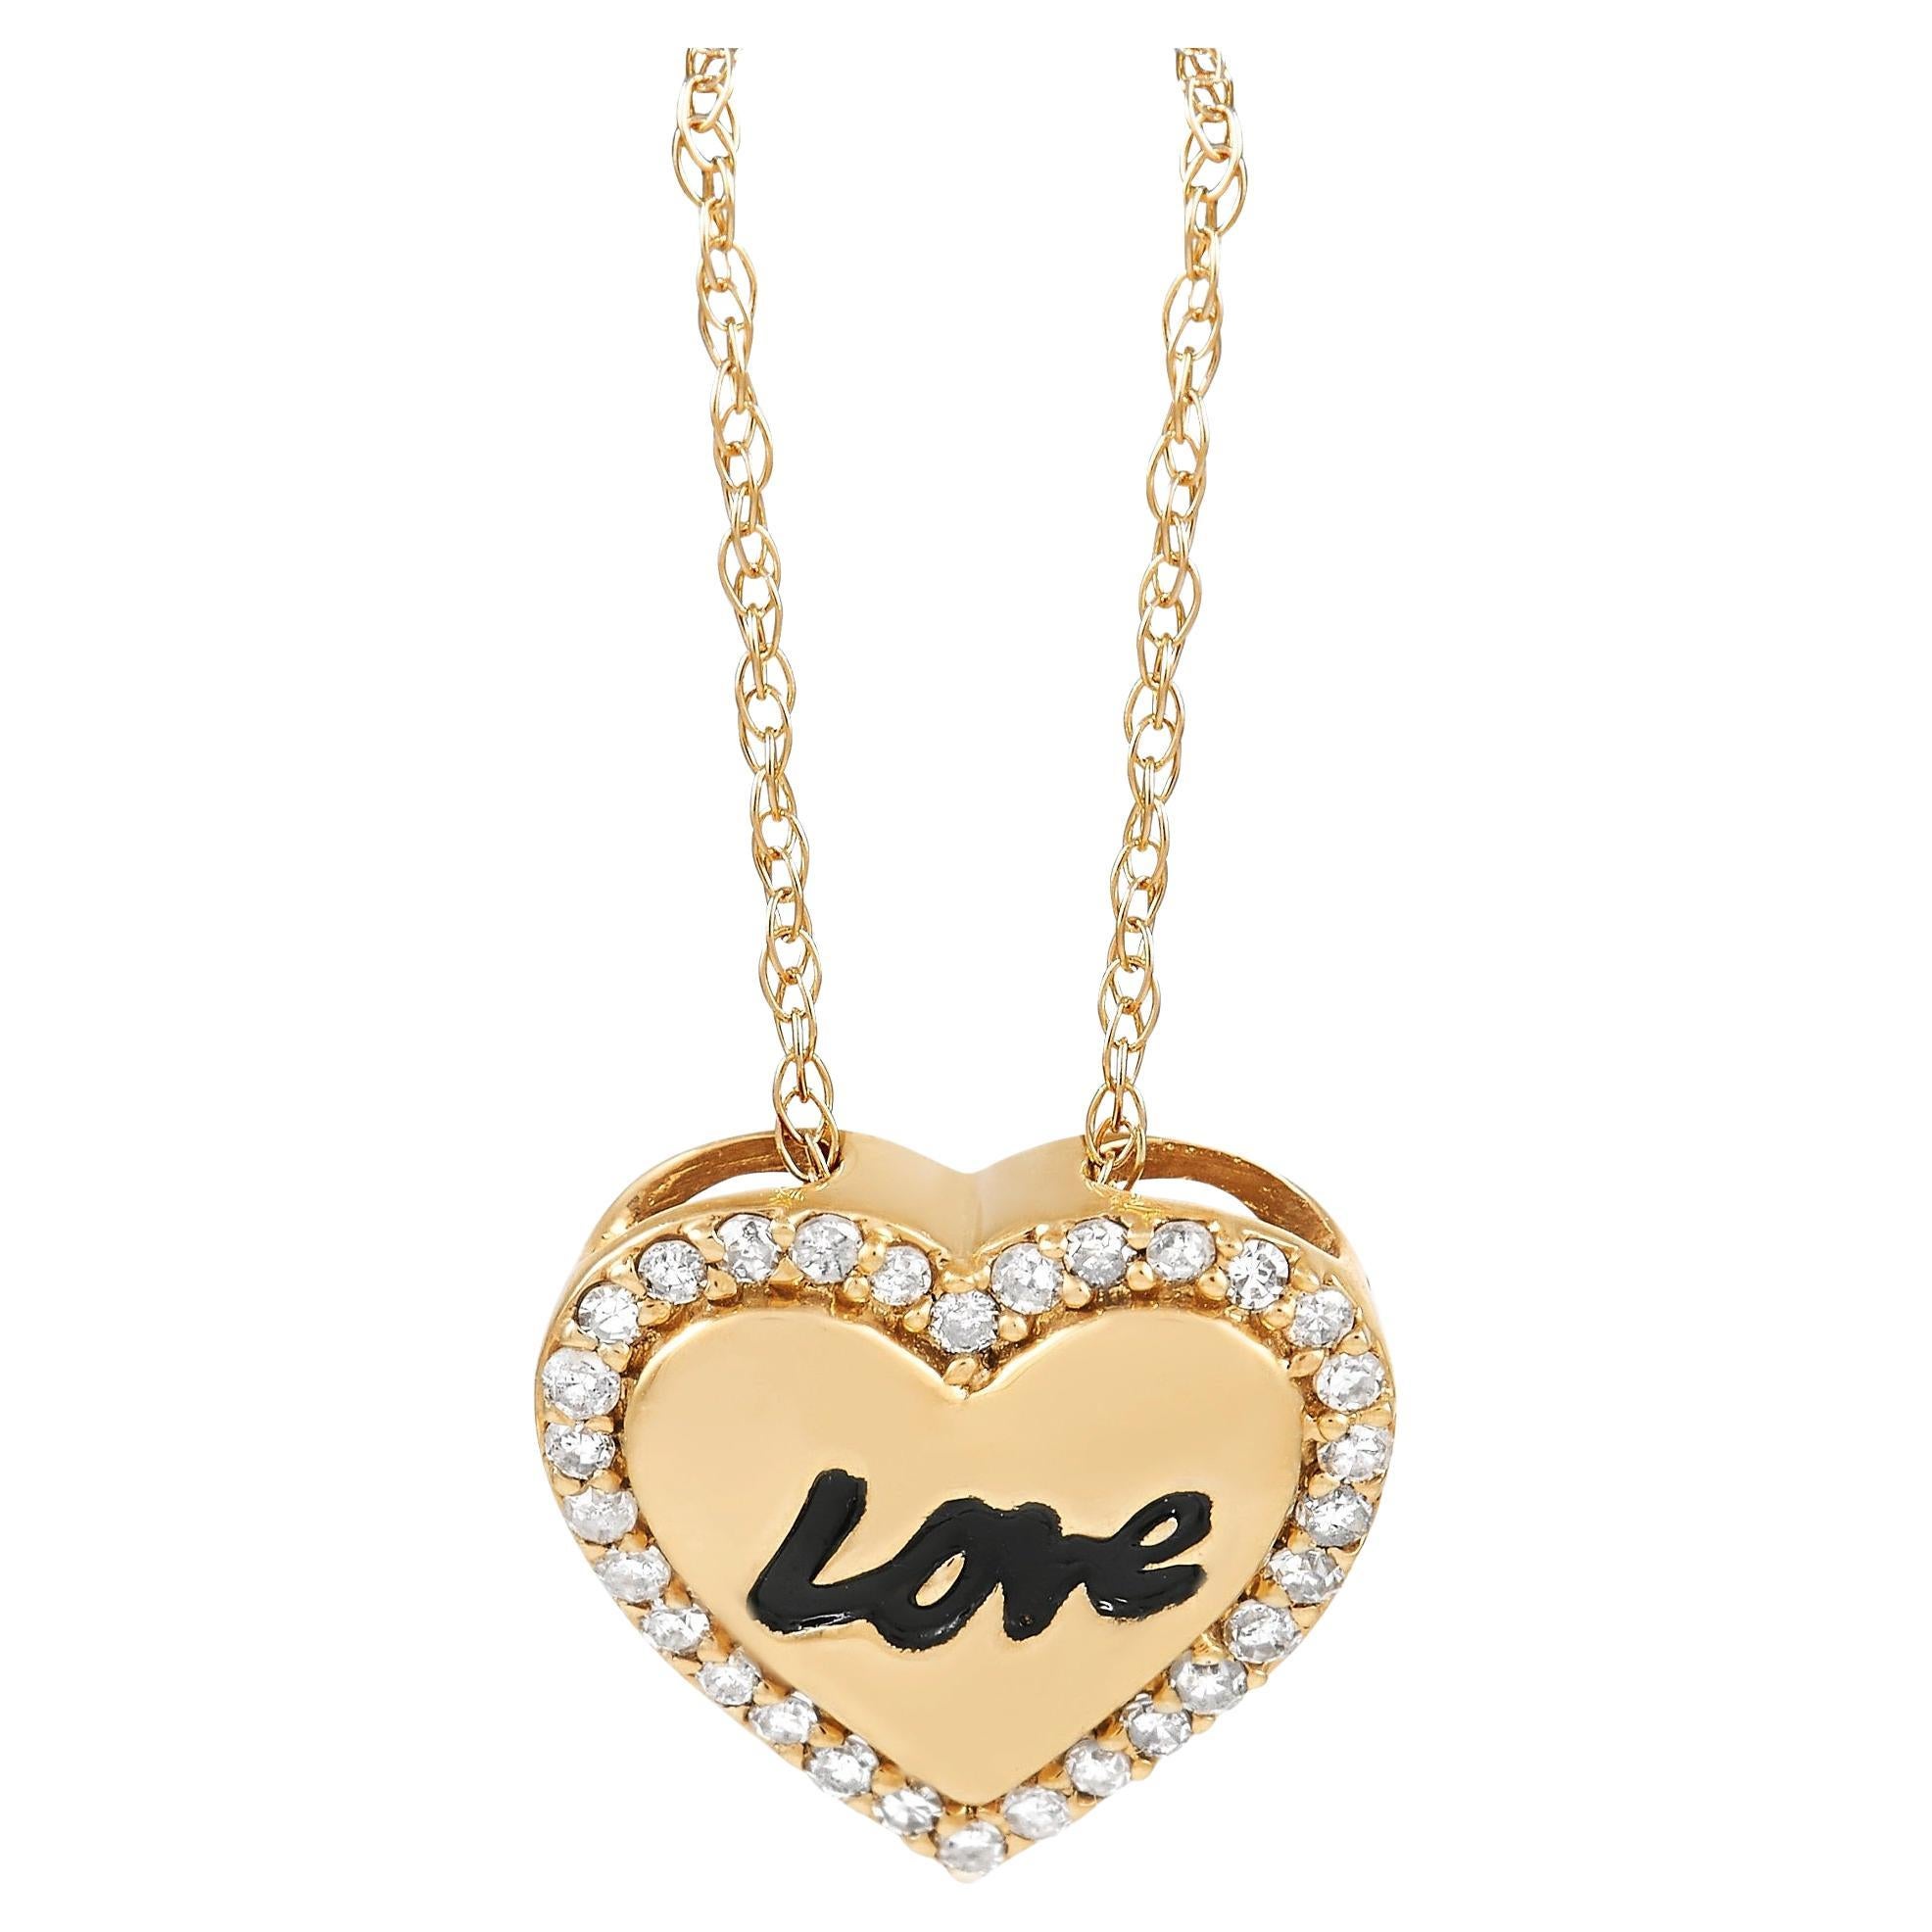 LB Exclusive 14K Yellow Gold 0.10 Ct Diamond Love Heart Pendant Necklace For Sale